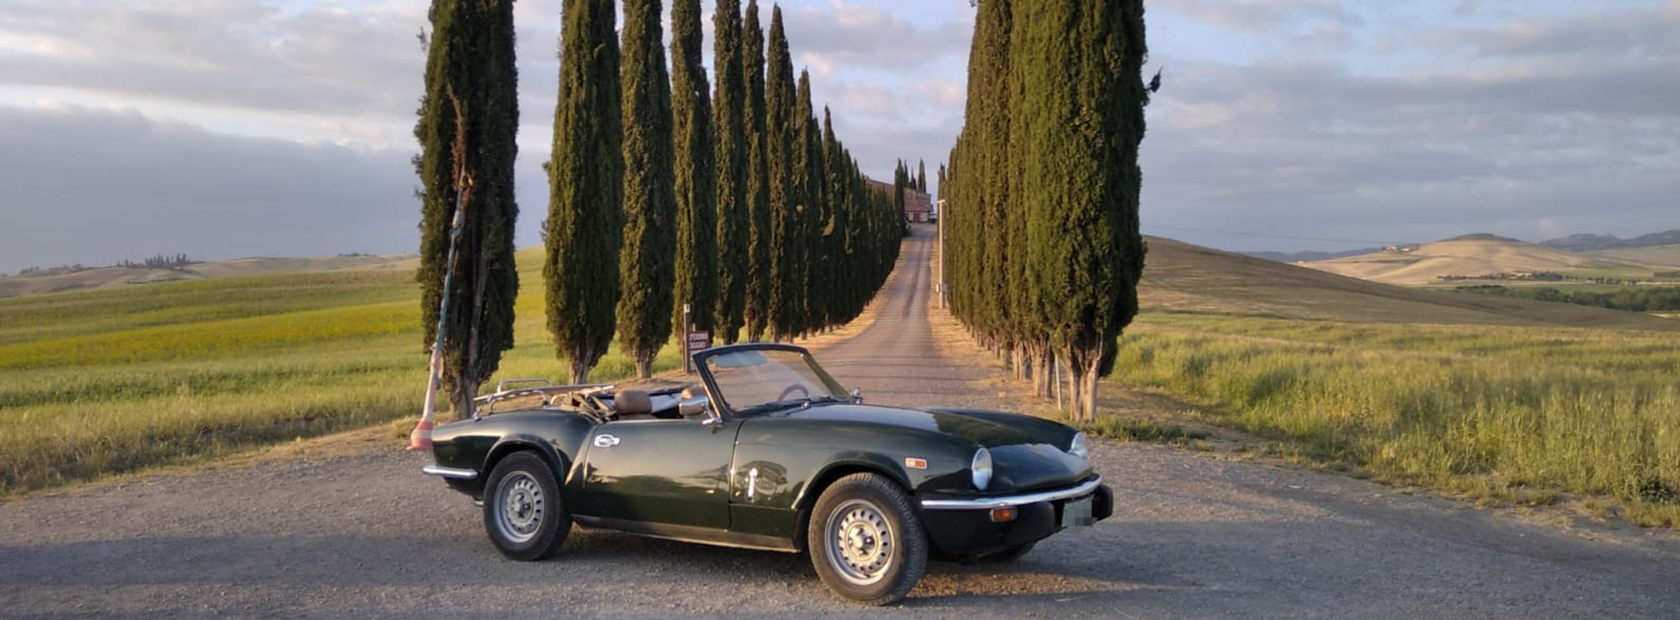 Triumph Spitfire spider rental for tours in Valdorcia and weddings